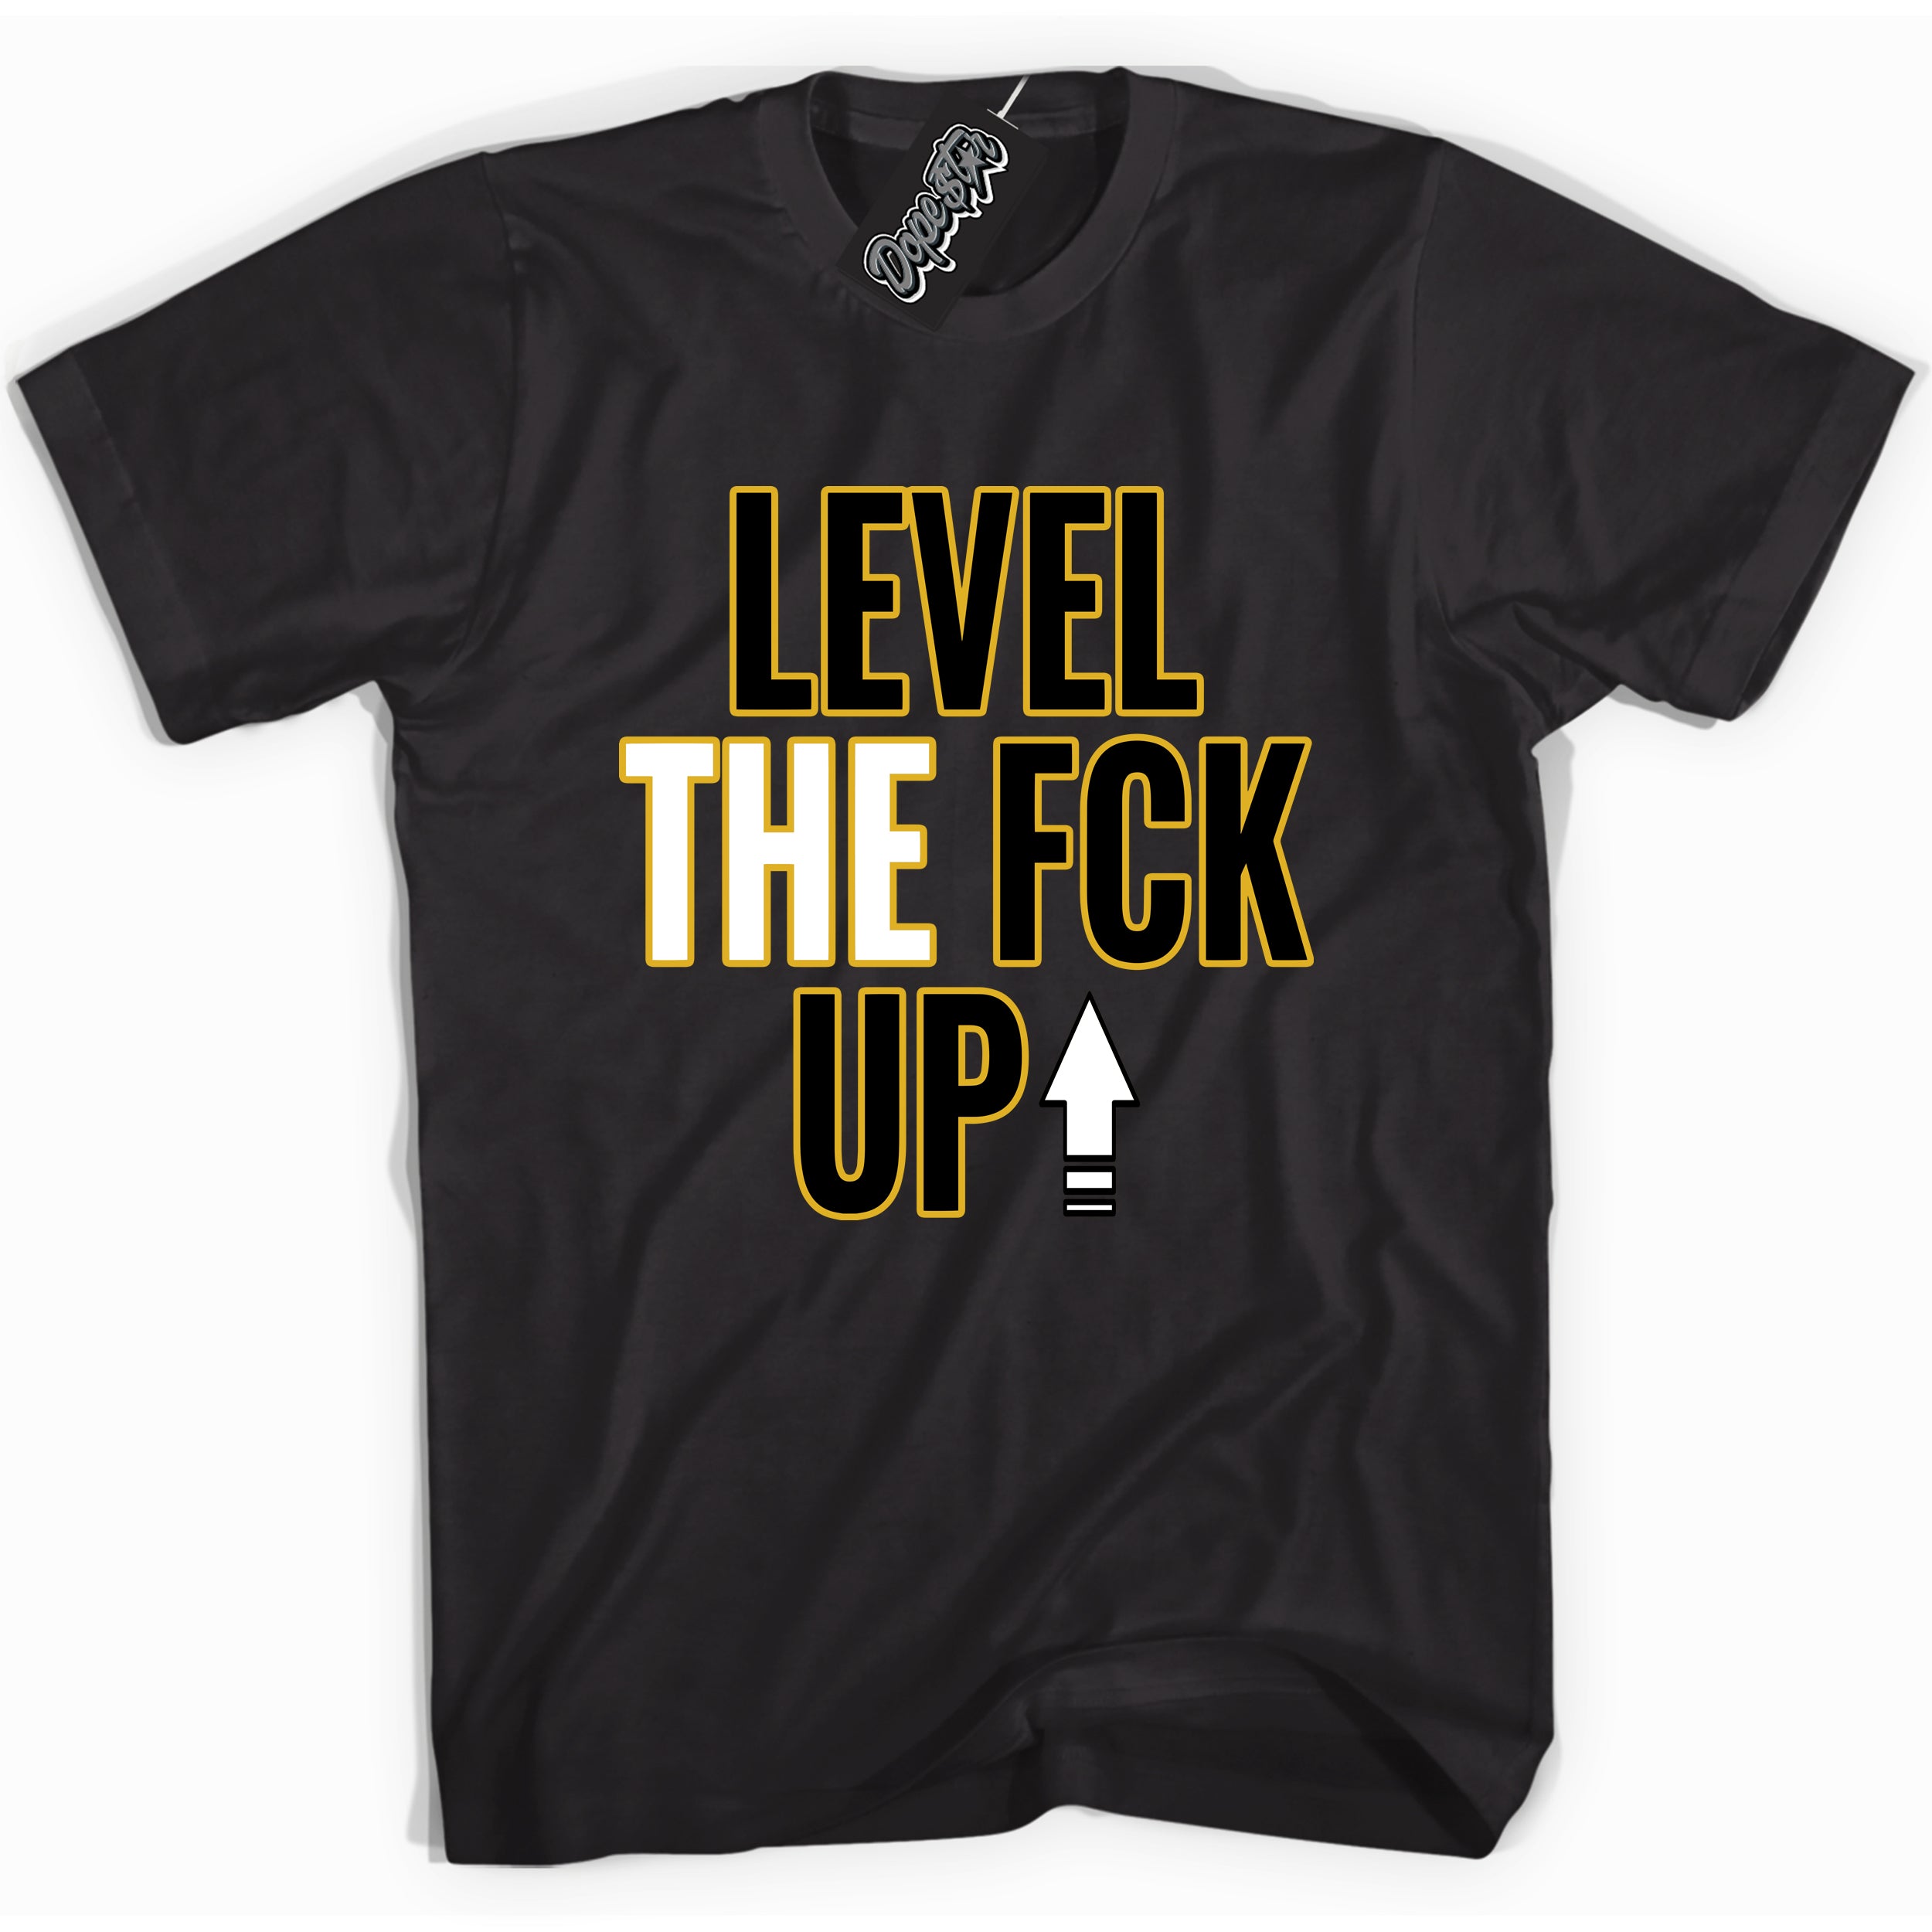 Cool Black Shirt with “ Level The Fck Up ” design that perfectly matches Yellow Ochre 6s Sneakers.